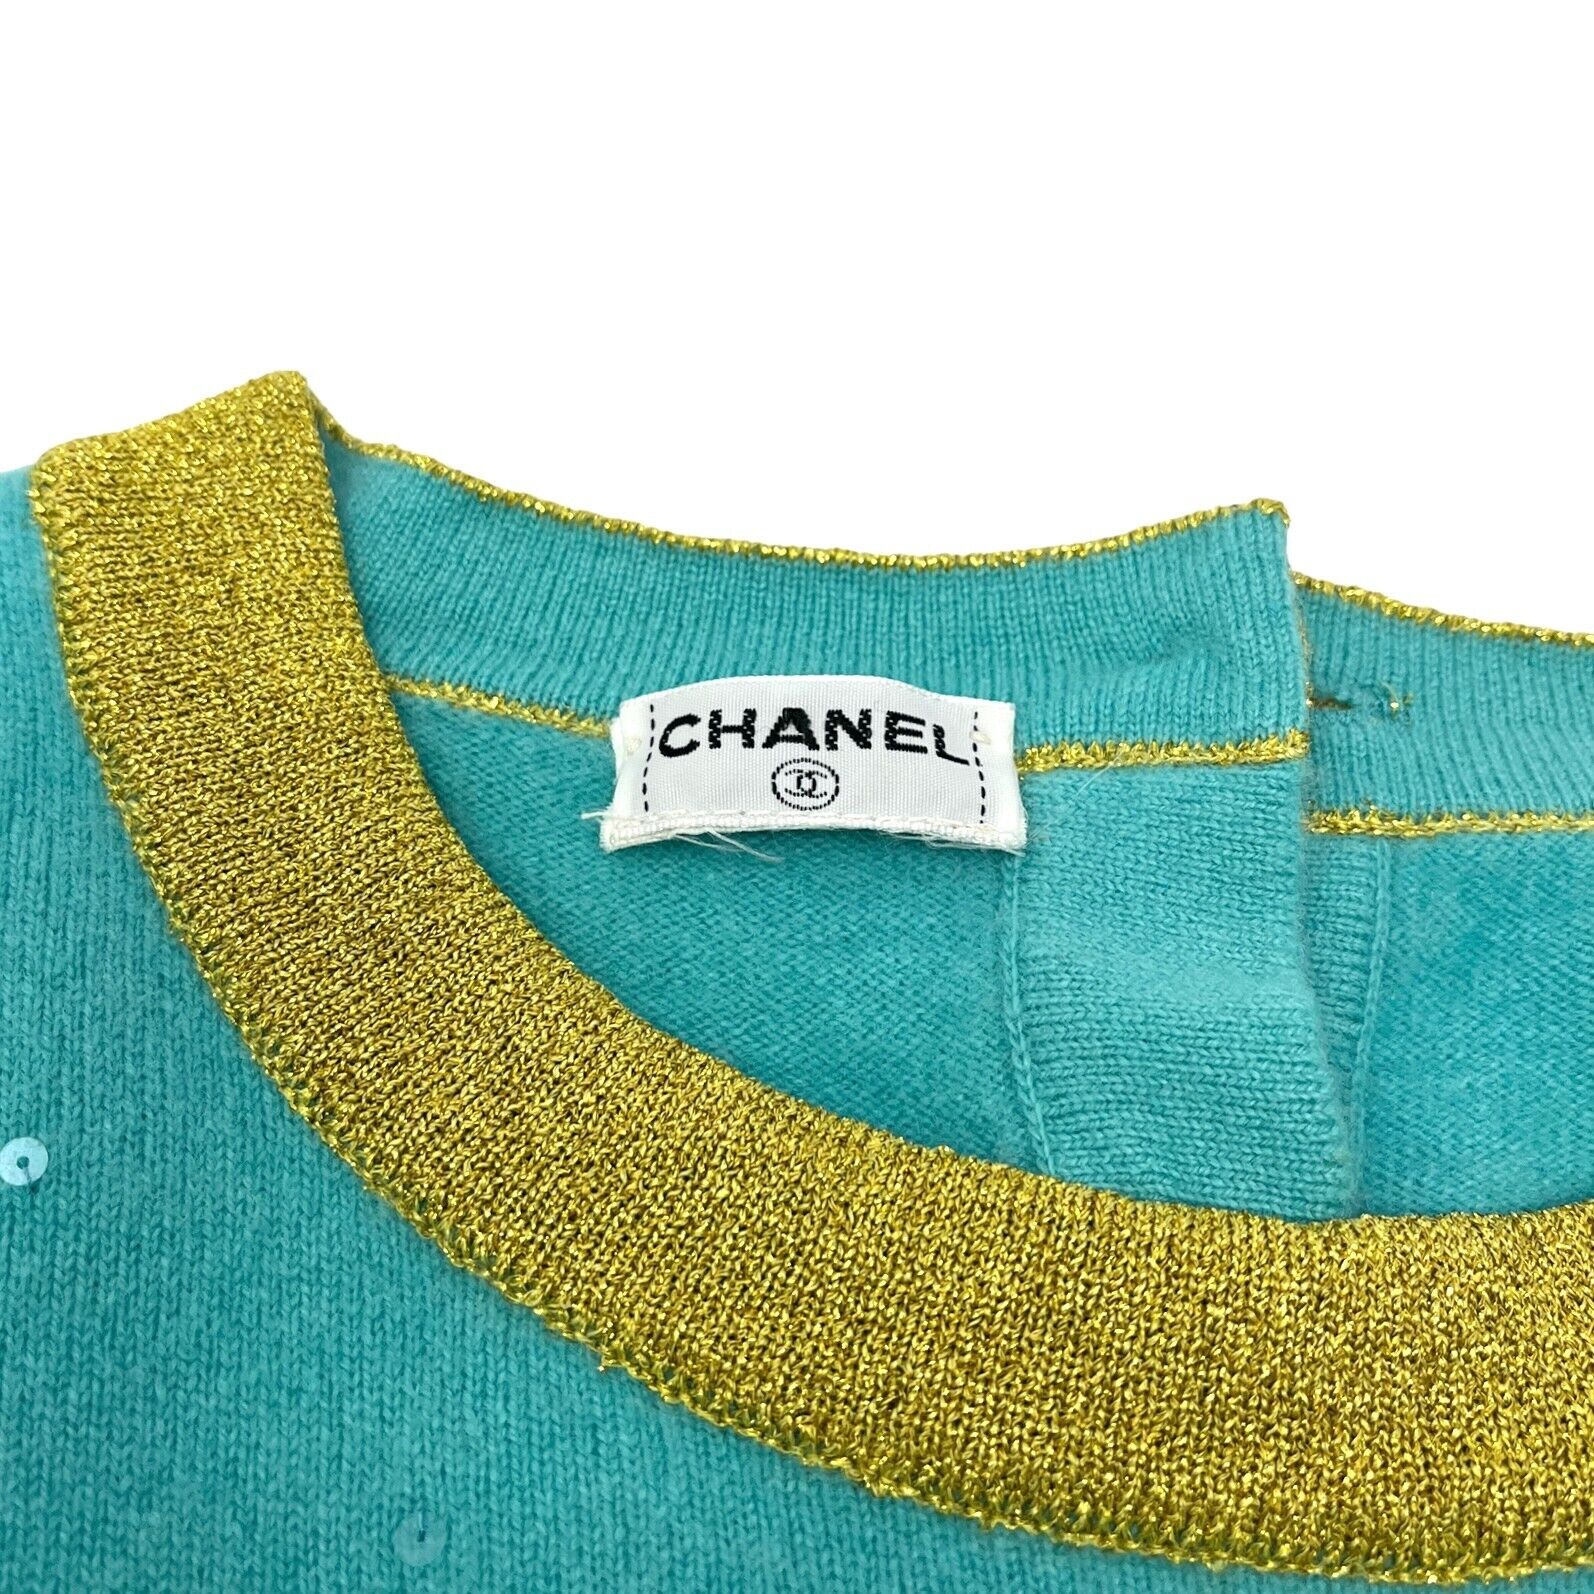 CHANEL Vintage 96A CC Logo Sweater Top Cropped Top Glitter Sequins Blue RankAB